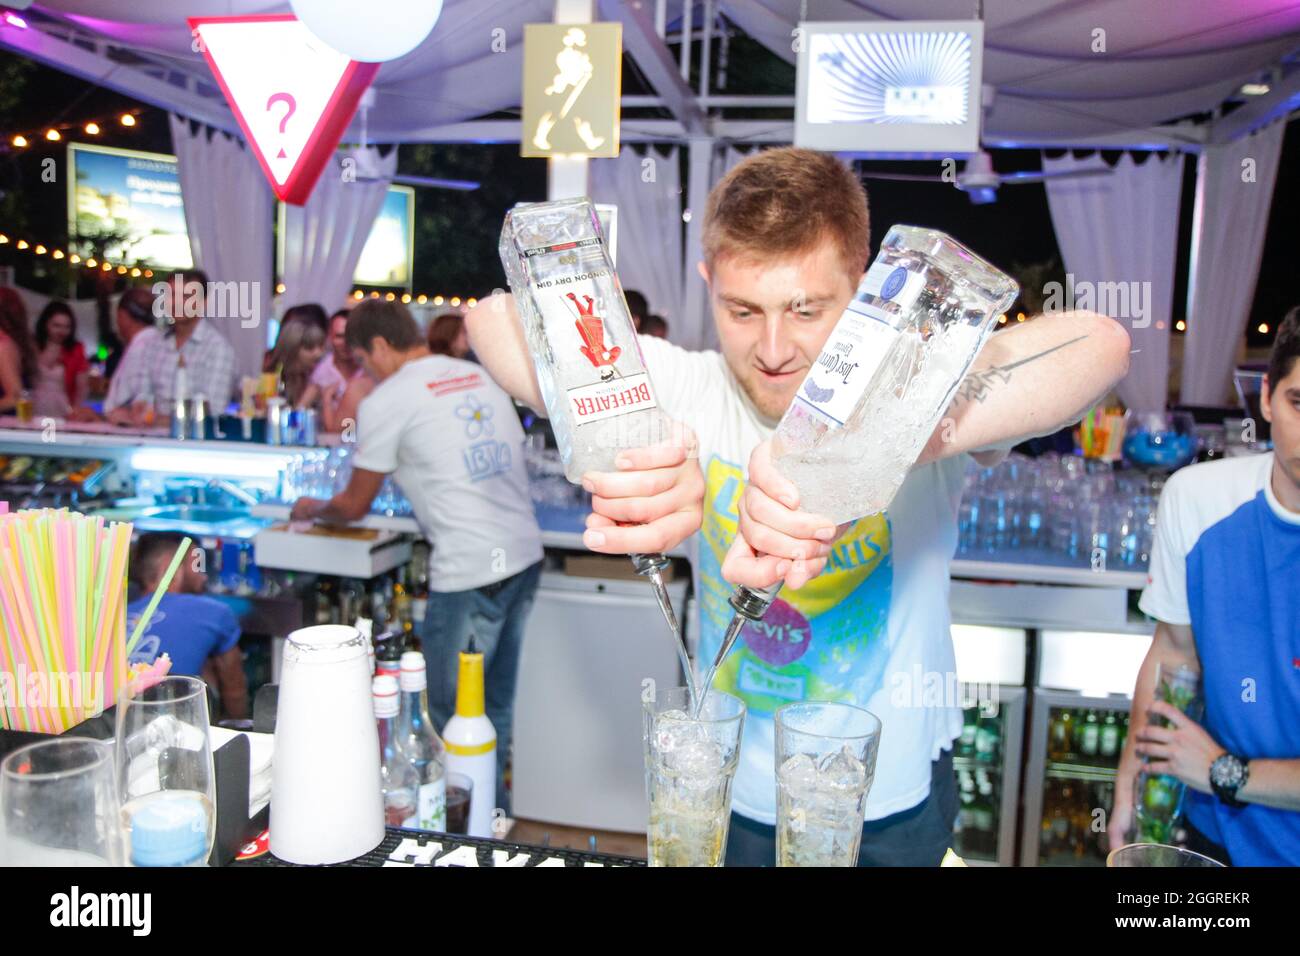 Odessa, Ukraine May 24, 2013: Barman at work in luxury nightclub during night party. Bartender make fun at party time in elite night club Stock Photo